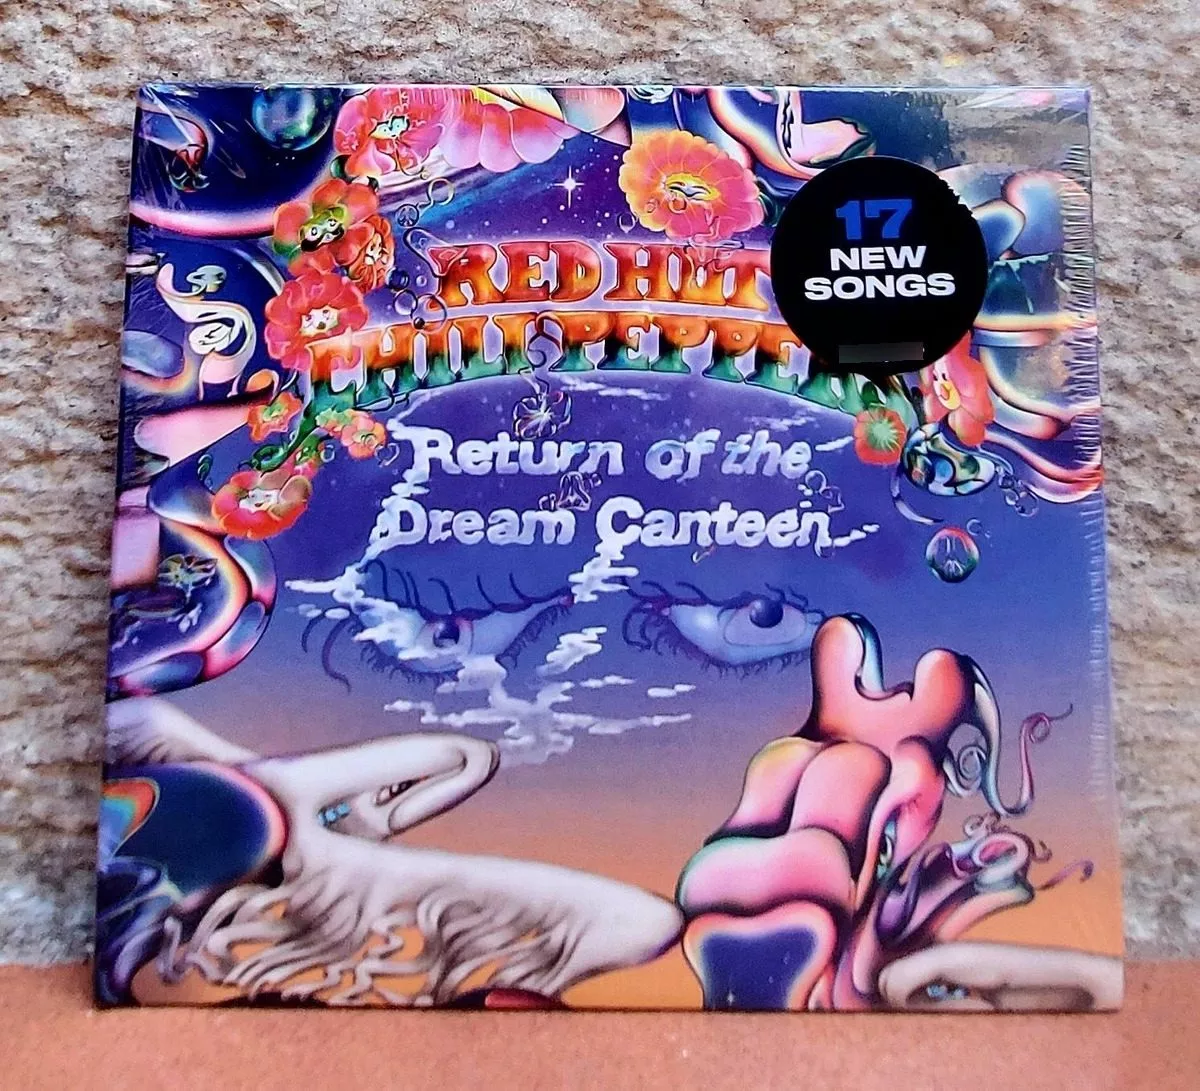 Red Hot Chili Peppers - Return Of The Dream Canteen (cd).